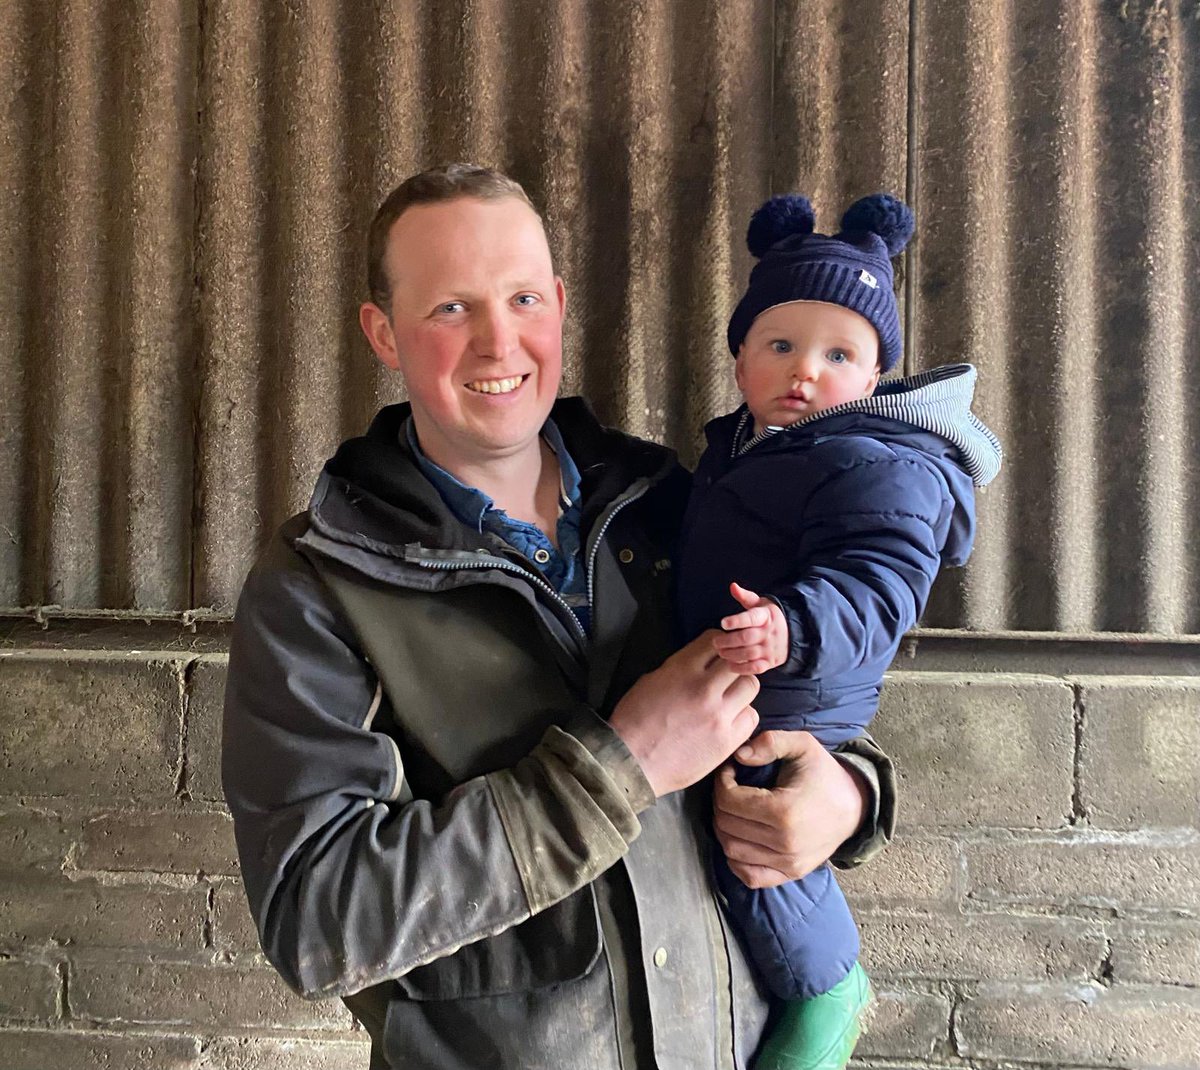 Many thanks to four generations of the Jackson family for welcoming us to their farm near Brechin for a visit to help publicise an RSABI wellbeing initiative. Here is one of the younger members of the Jackson team, Alistair, pictured in the cattle shed with his Dad Glenn. Many